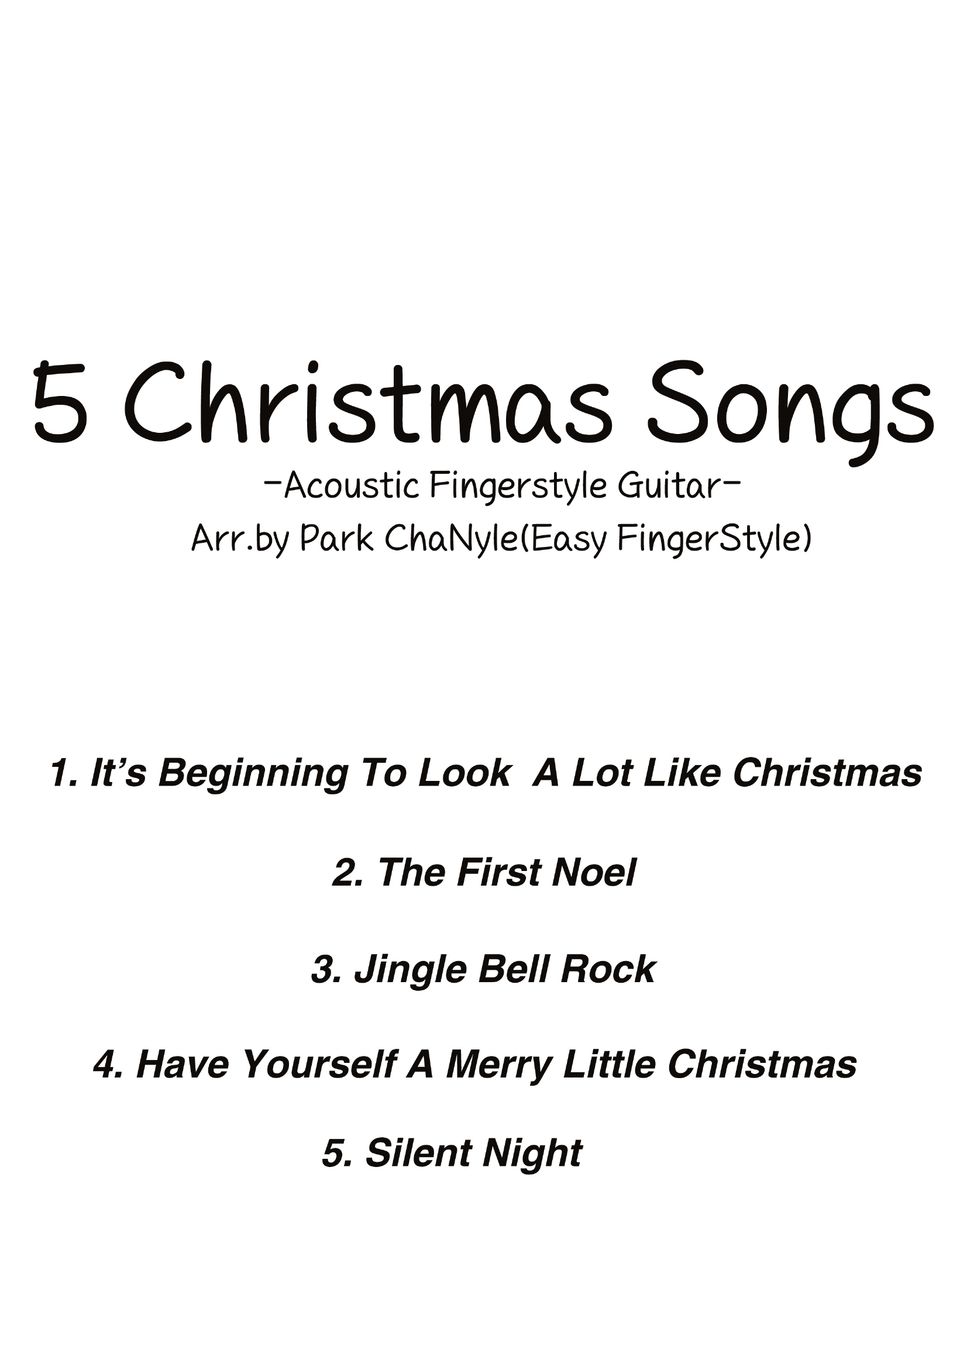 Franz Xaver Gruber,Bobby Helms,Hugh Martin,Meredith Willson - 5 Christmas Songs(Fingerstyle Guitar) (Fingerstyle Guitar) by Park ChaNyle